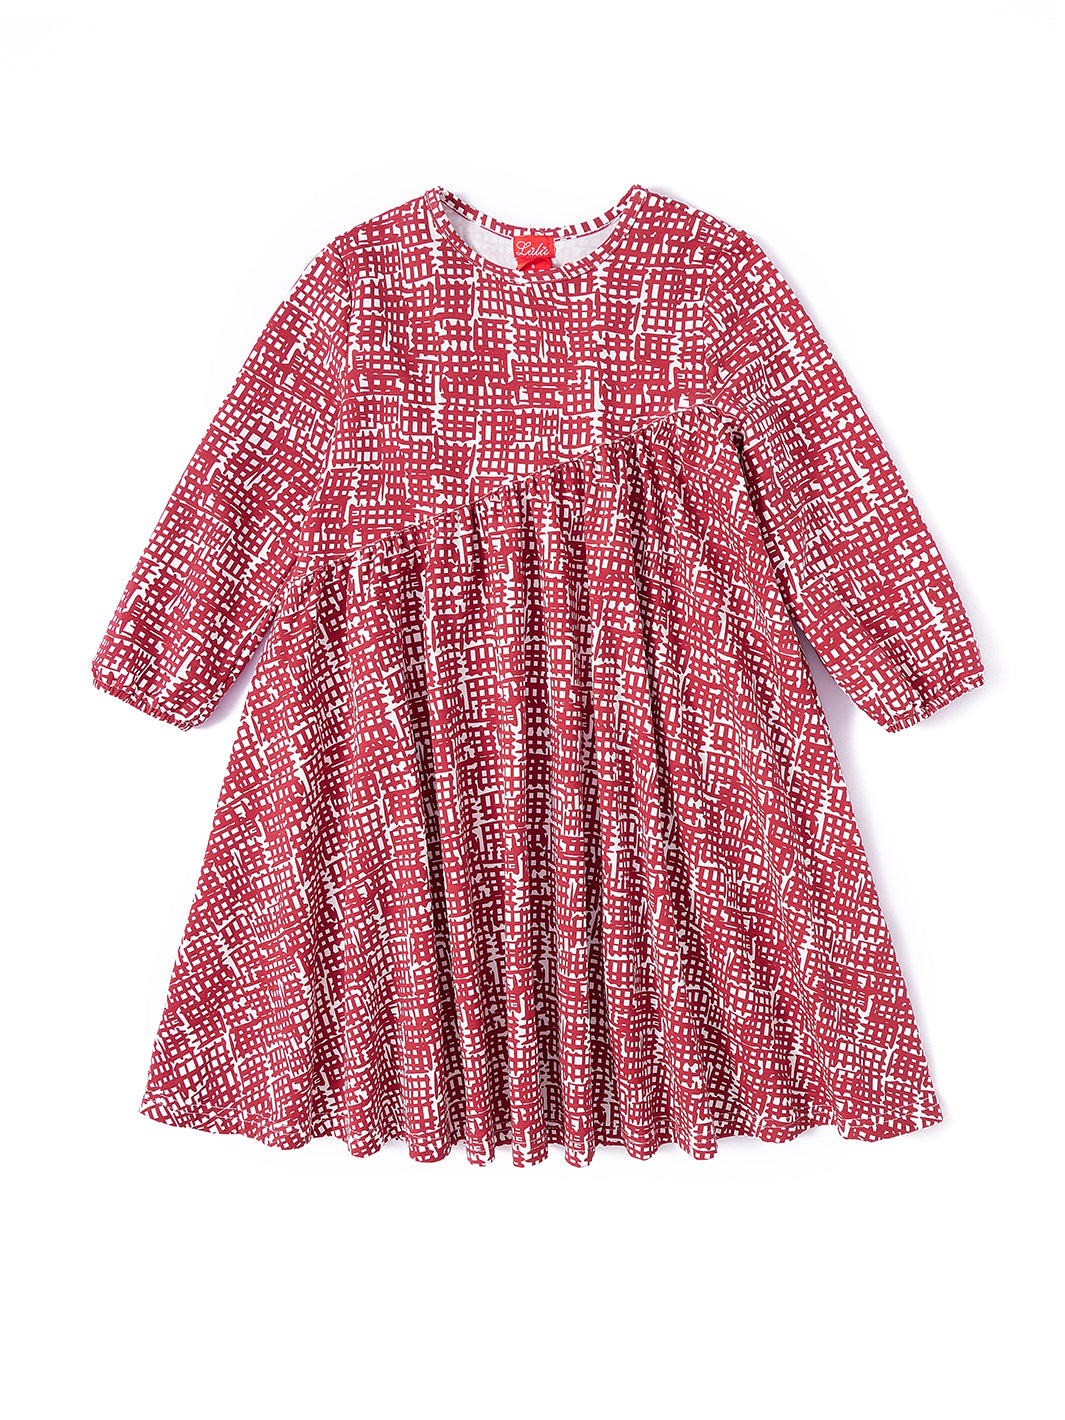 Uneven Checked Print Dress